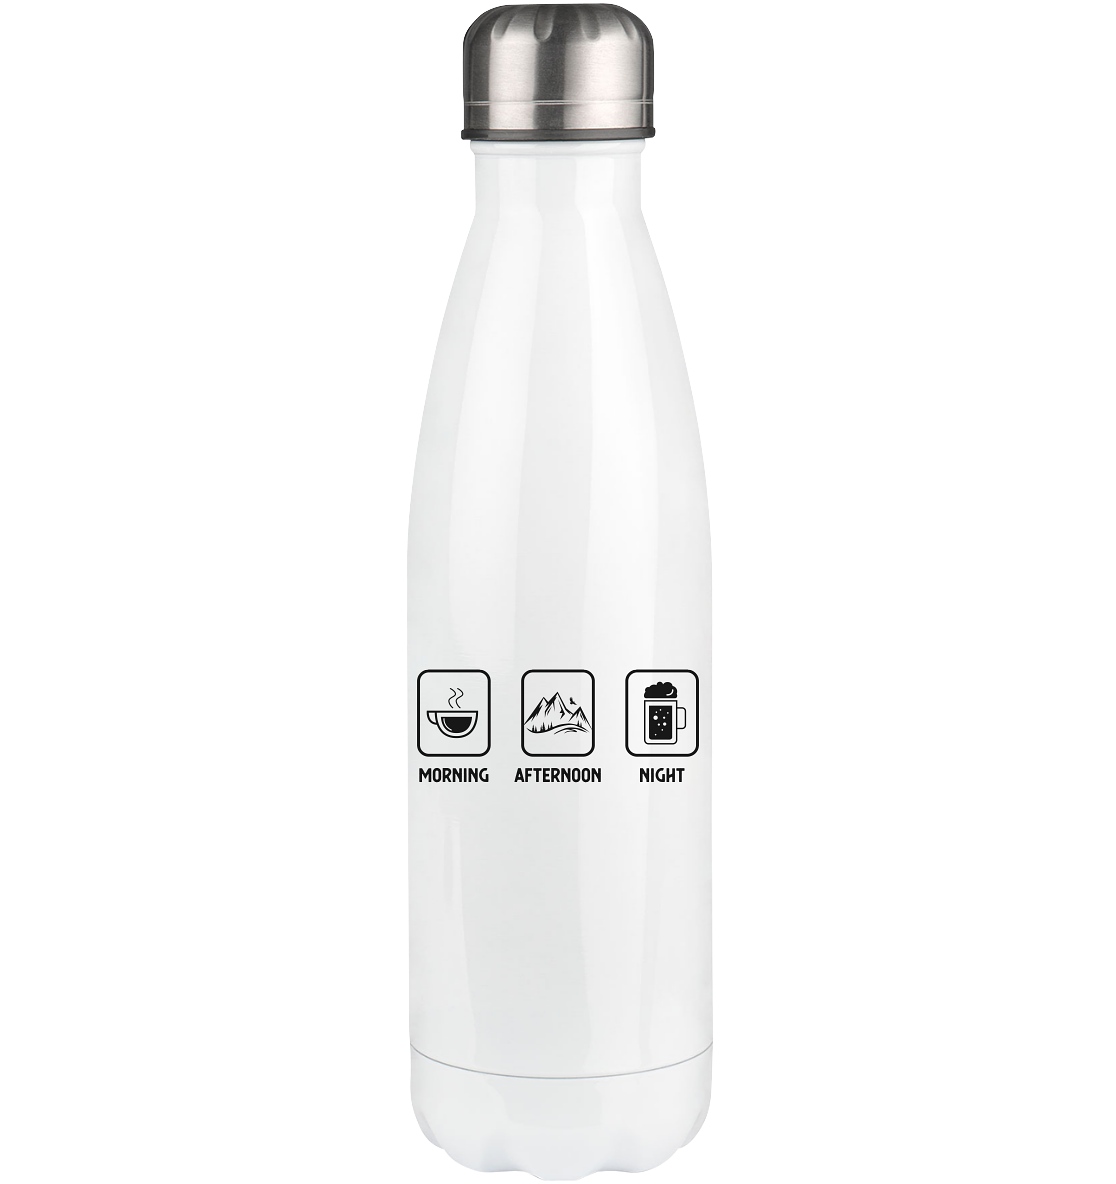 Morning Afternoon Night and Mountain - Edelstahl Thermosflasche berge 500ml